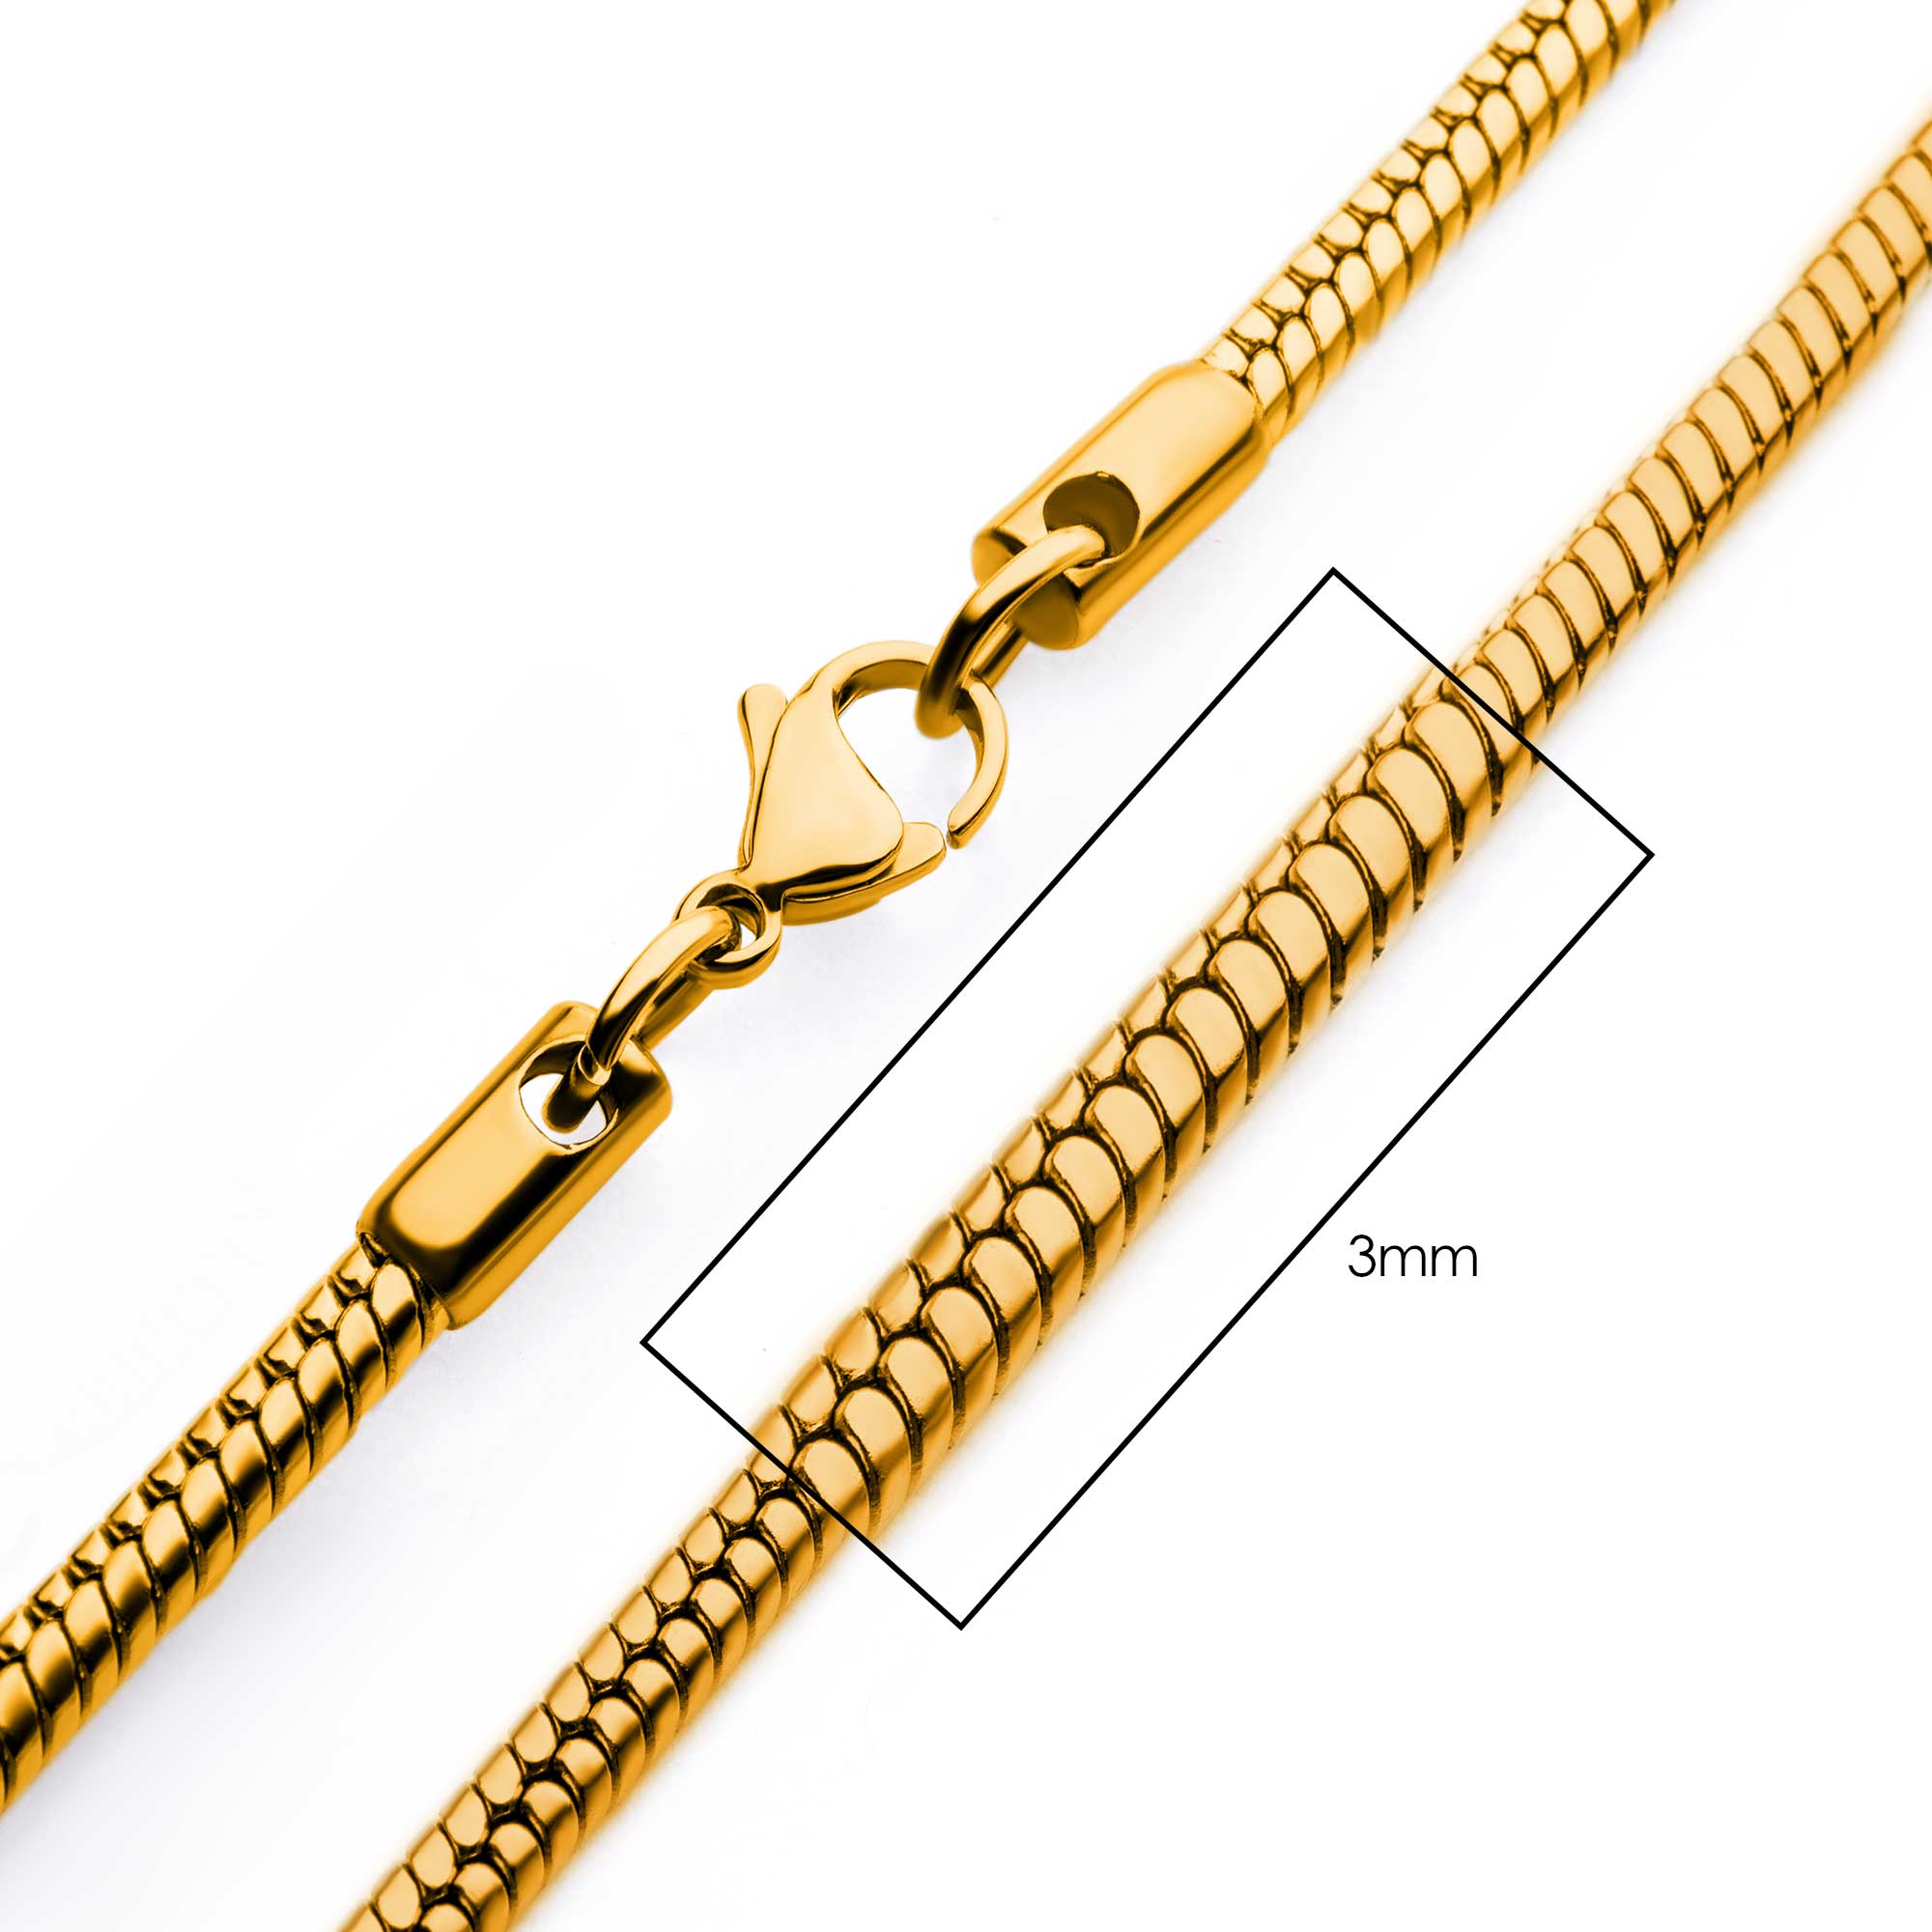 3mm 18K Gold Plated Rattail Chain Spath Jewelers Bartow, FL